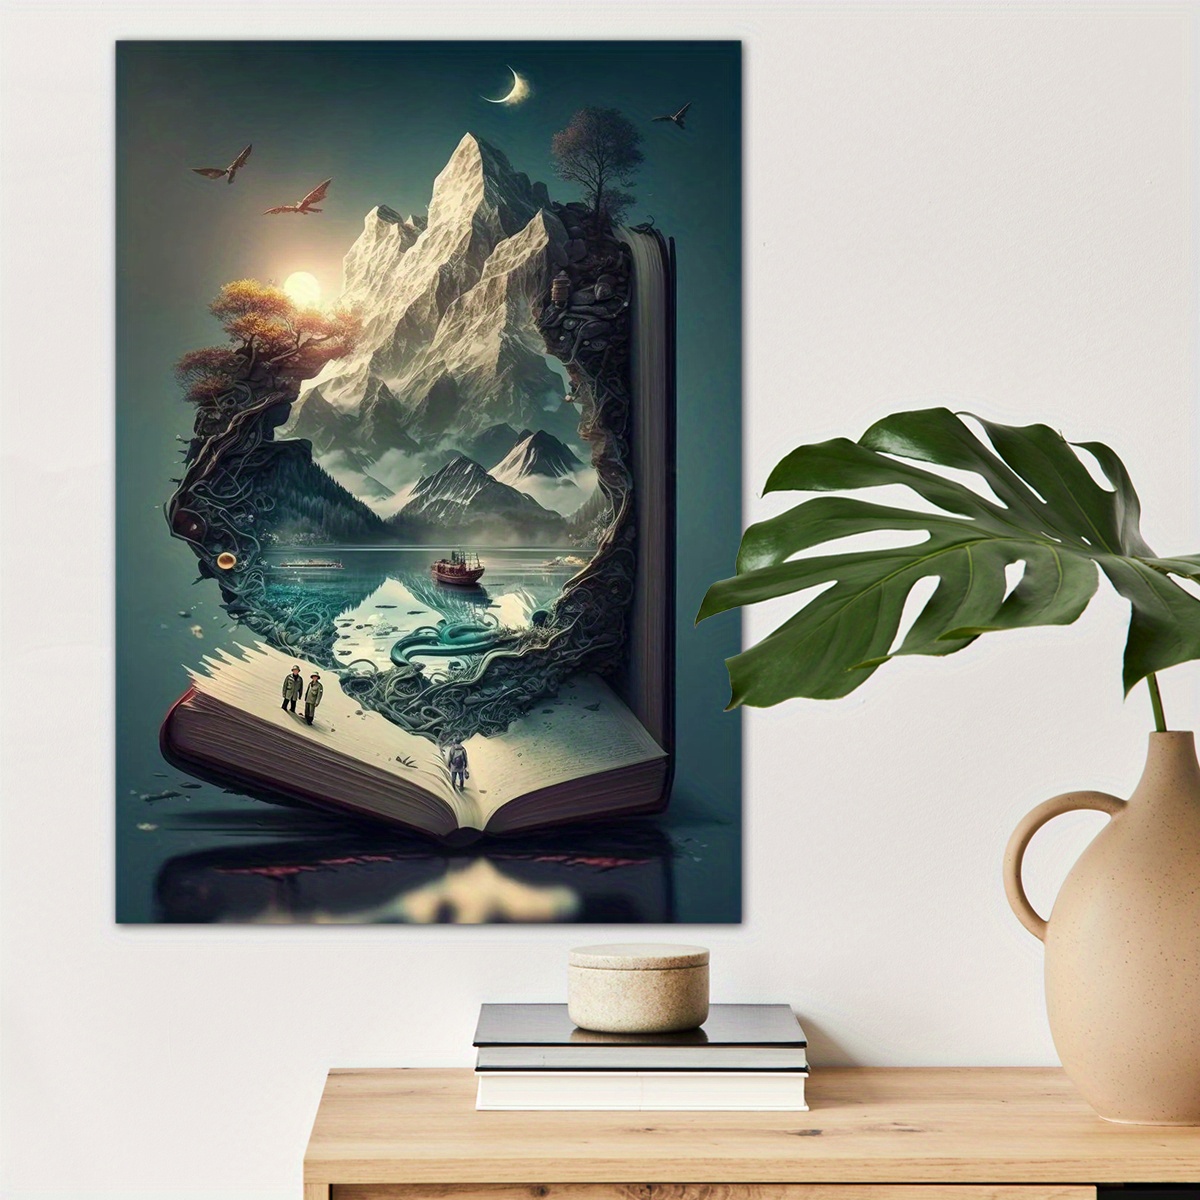 

1pc Readers Adventure Poster Canvas Wall Art For Home Decor, Reading Lovers Poster Wall Decor High Quality Canvas Prints For Living Room Bedroom Kitchen Office Cafe Decor, Perfect Gift And Decoration